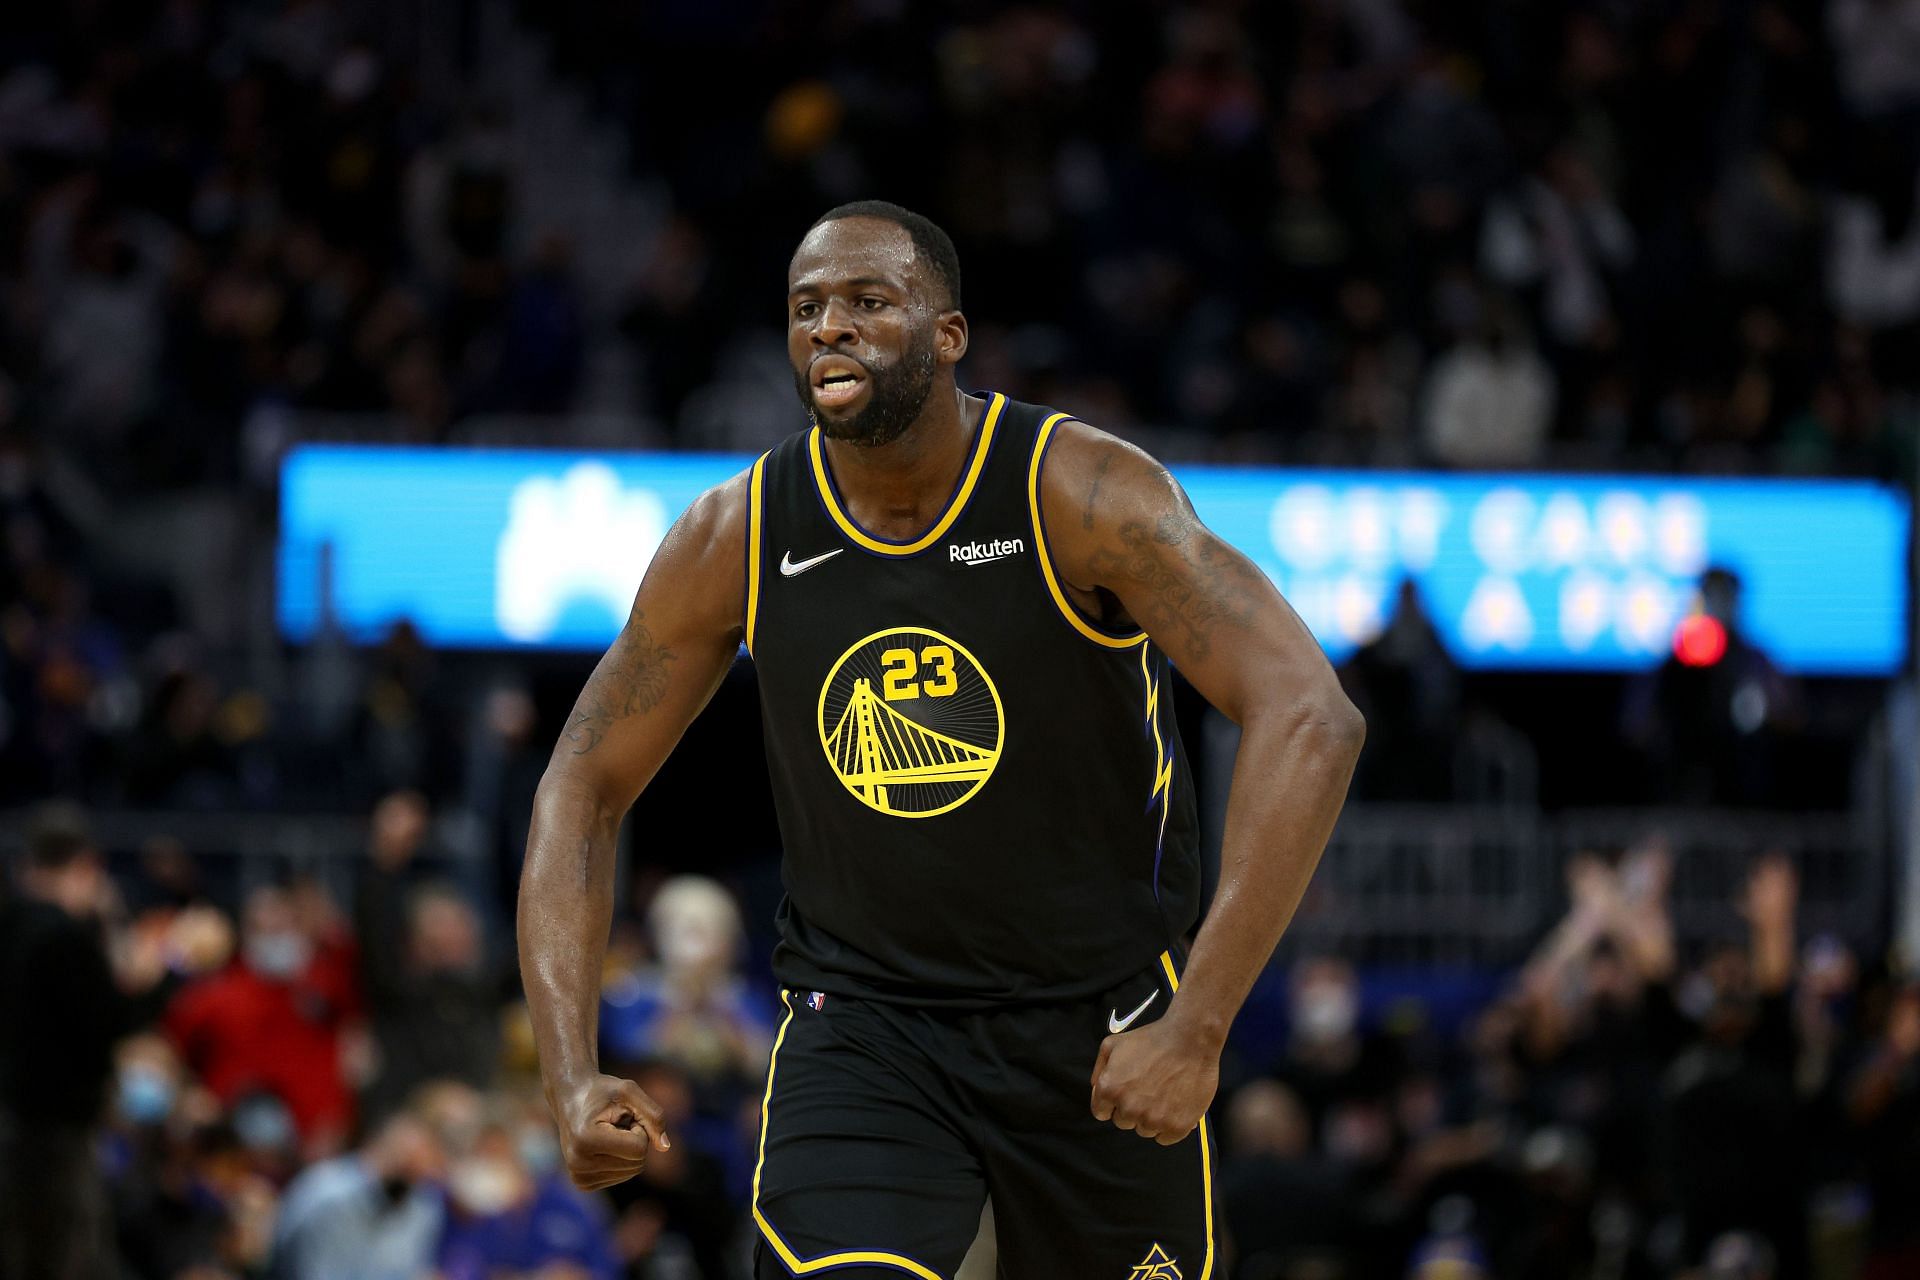 Draymond Green of the Golden State Warriors in action